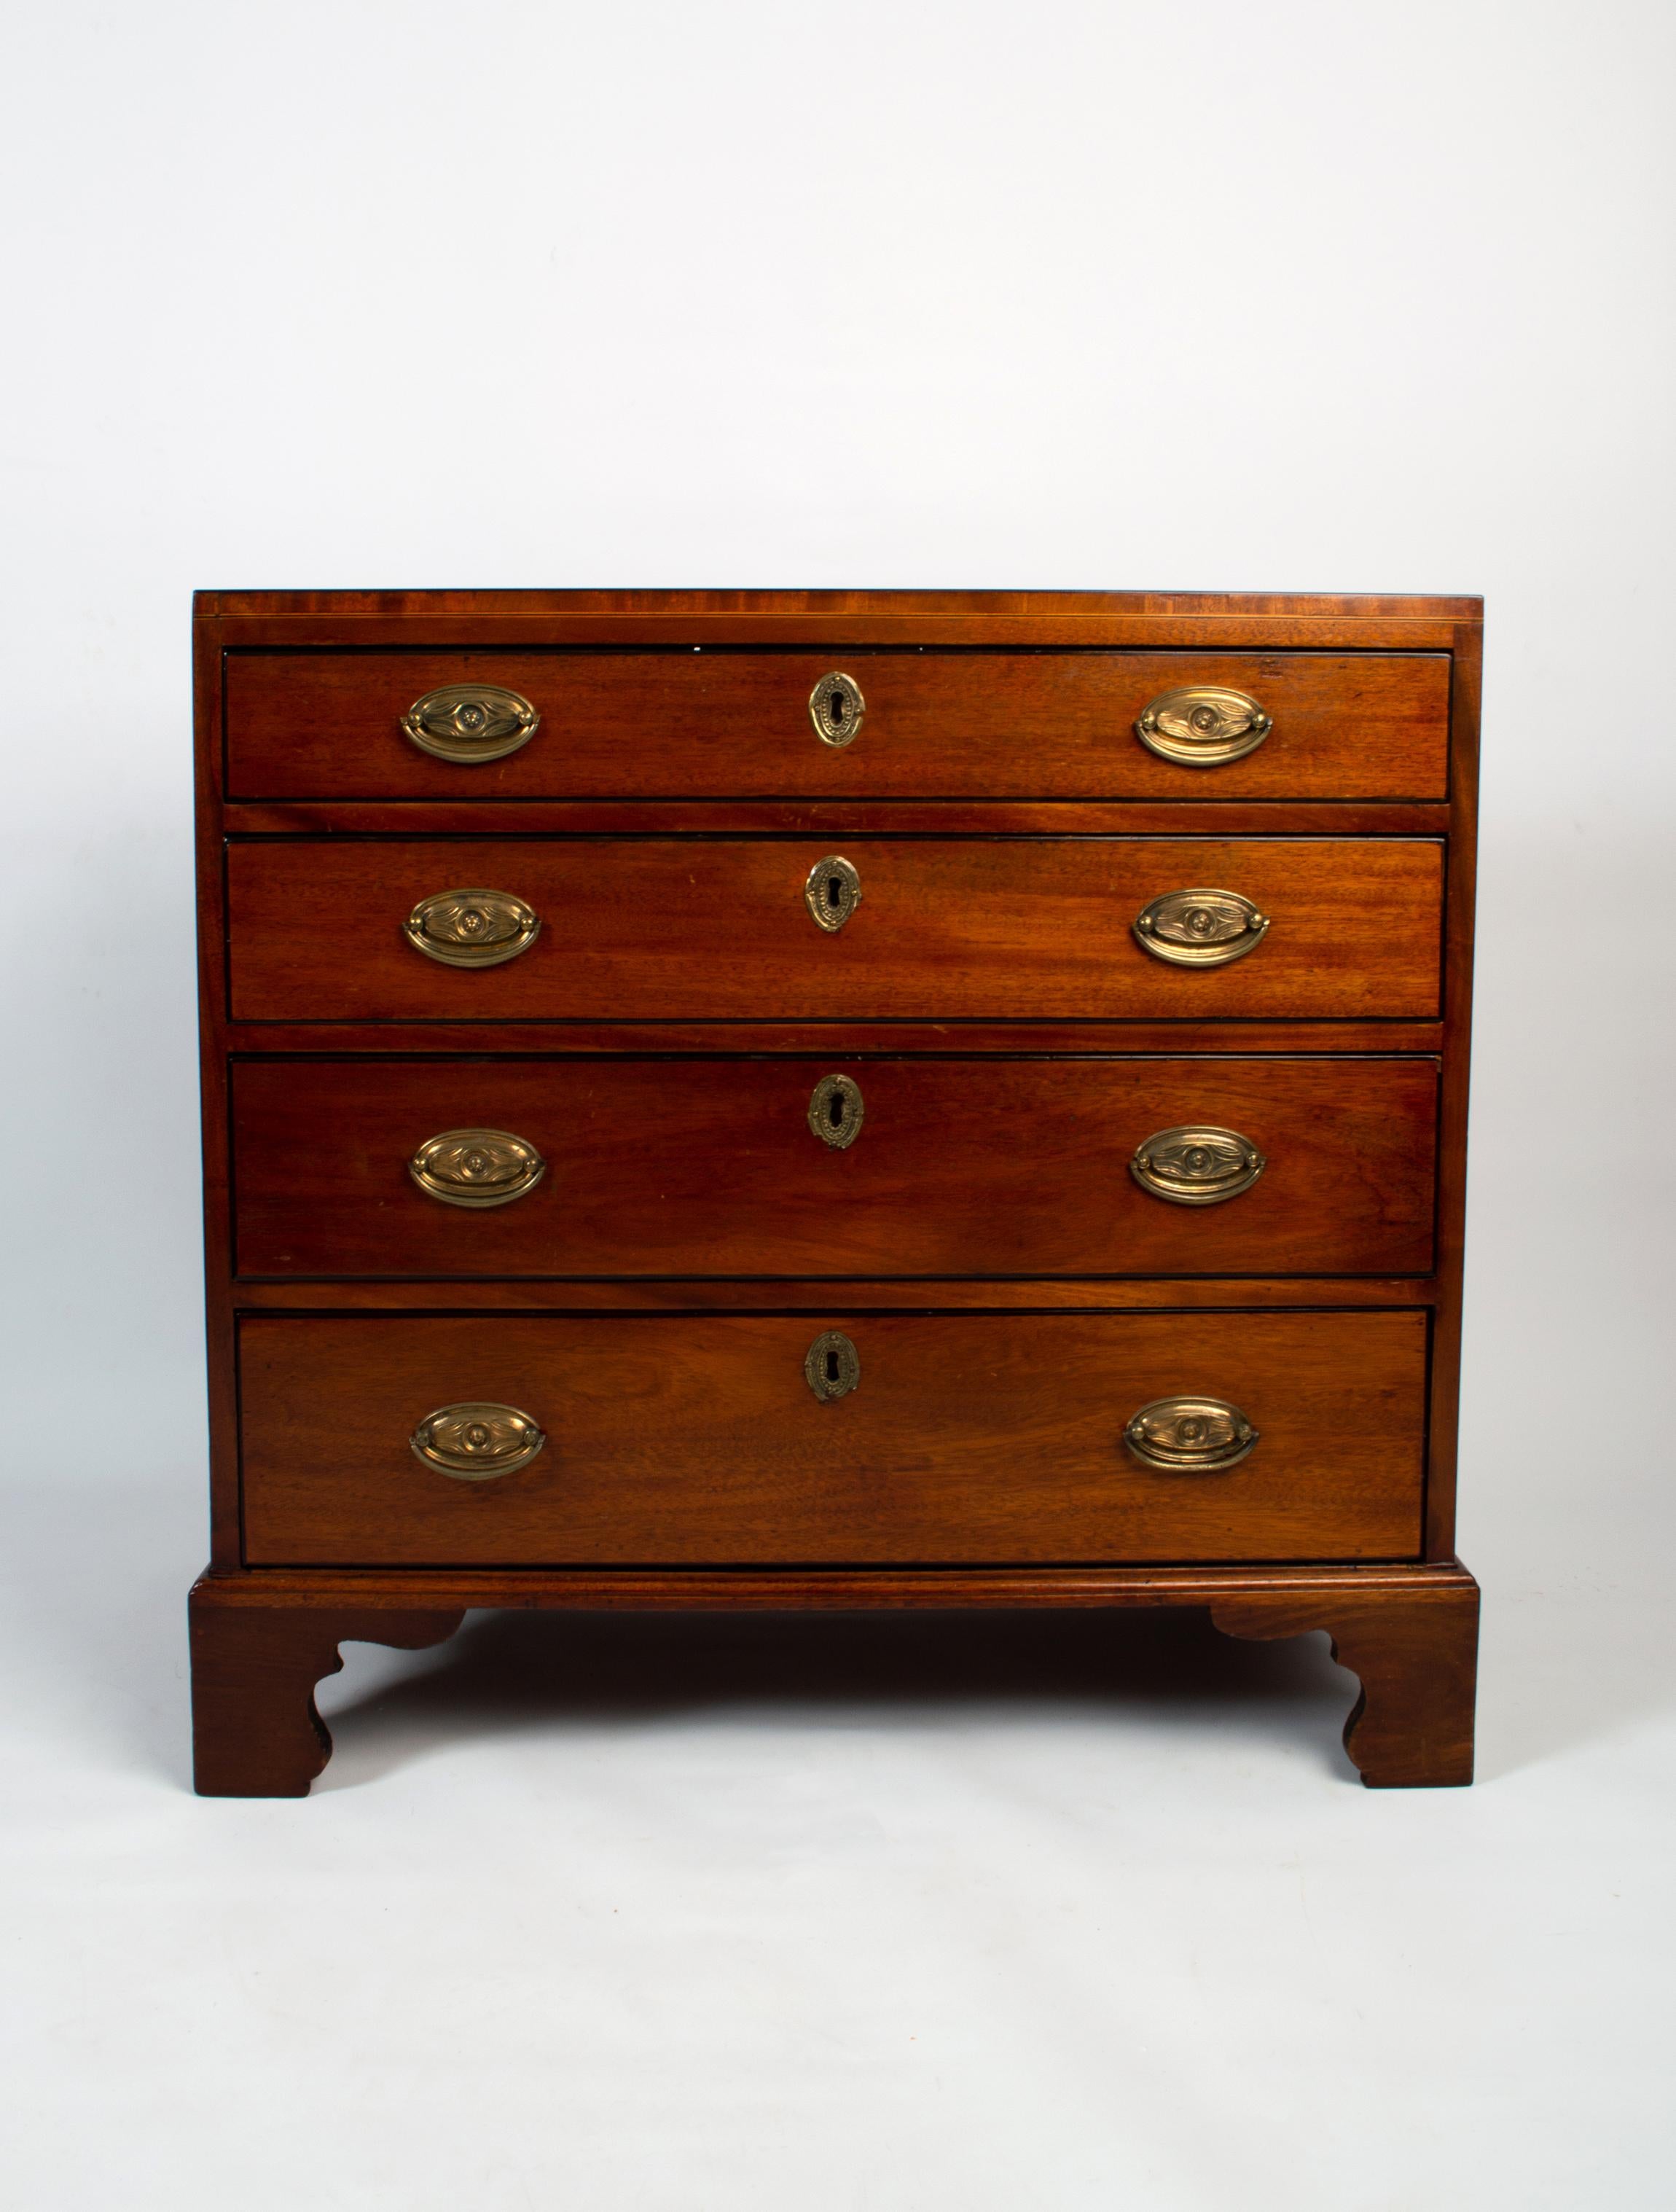 Antique English Georgian mahogany diminutive chest of drawers

A small-scale George II chest of drawers. 
Dating circa 1750

Comprised of four long graduating drawers with original brass oval pull handles and escutcheons. Standing on bracket